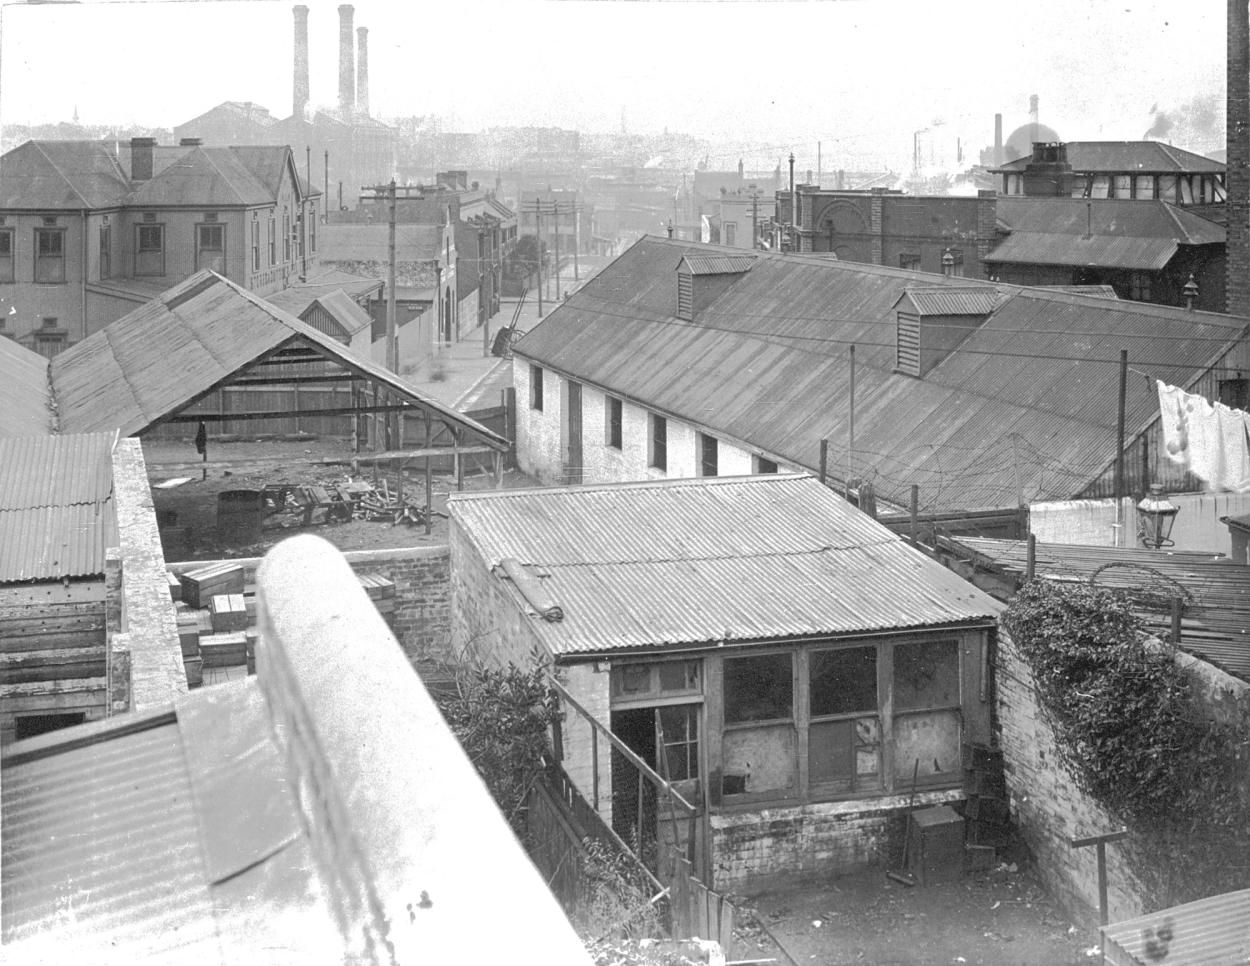 Black and white photograph of slums taken from a high vantage point with chimney stacks in the distance